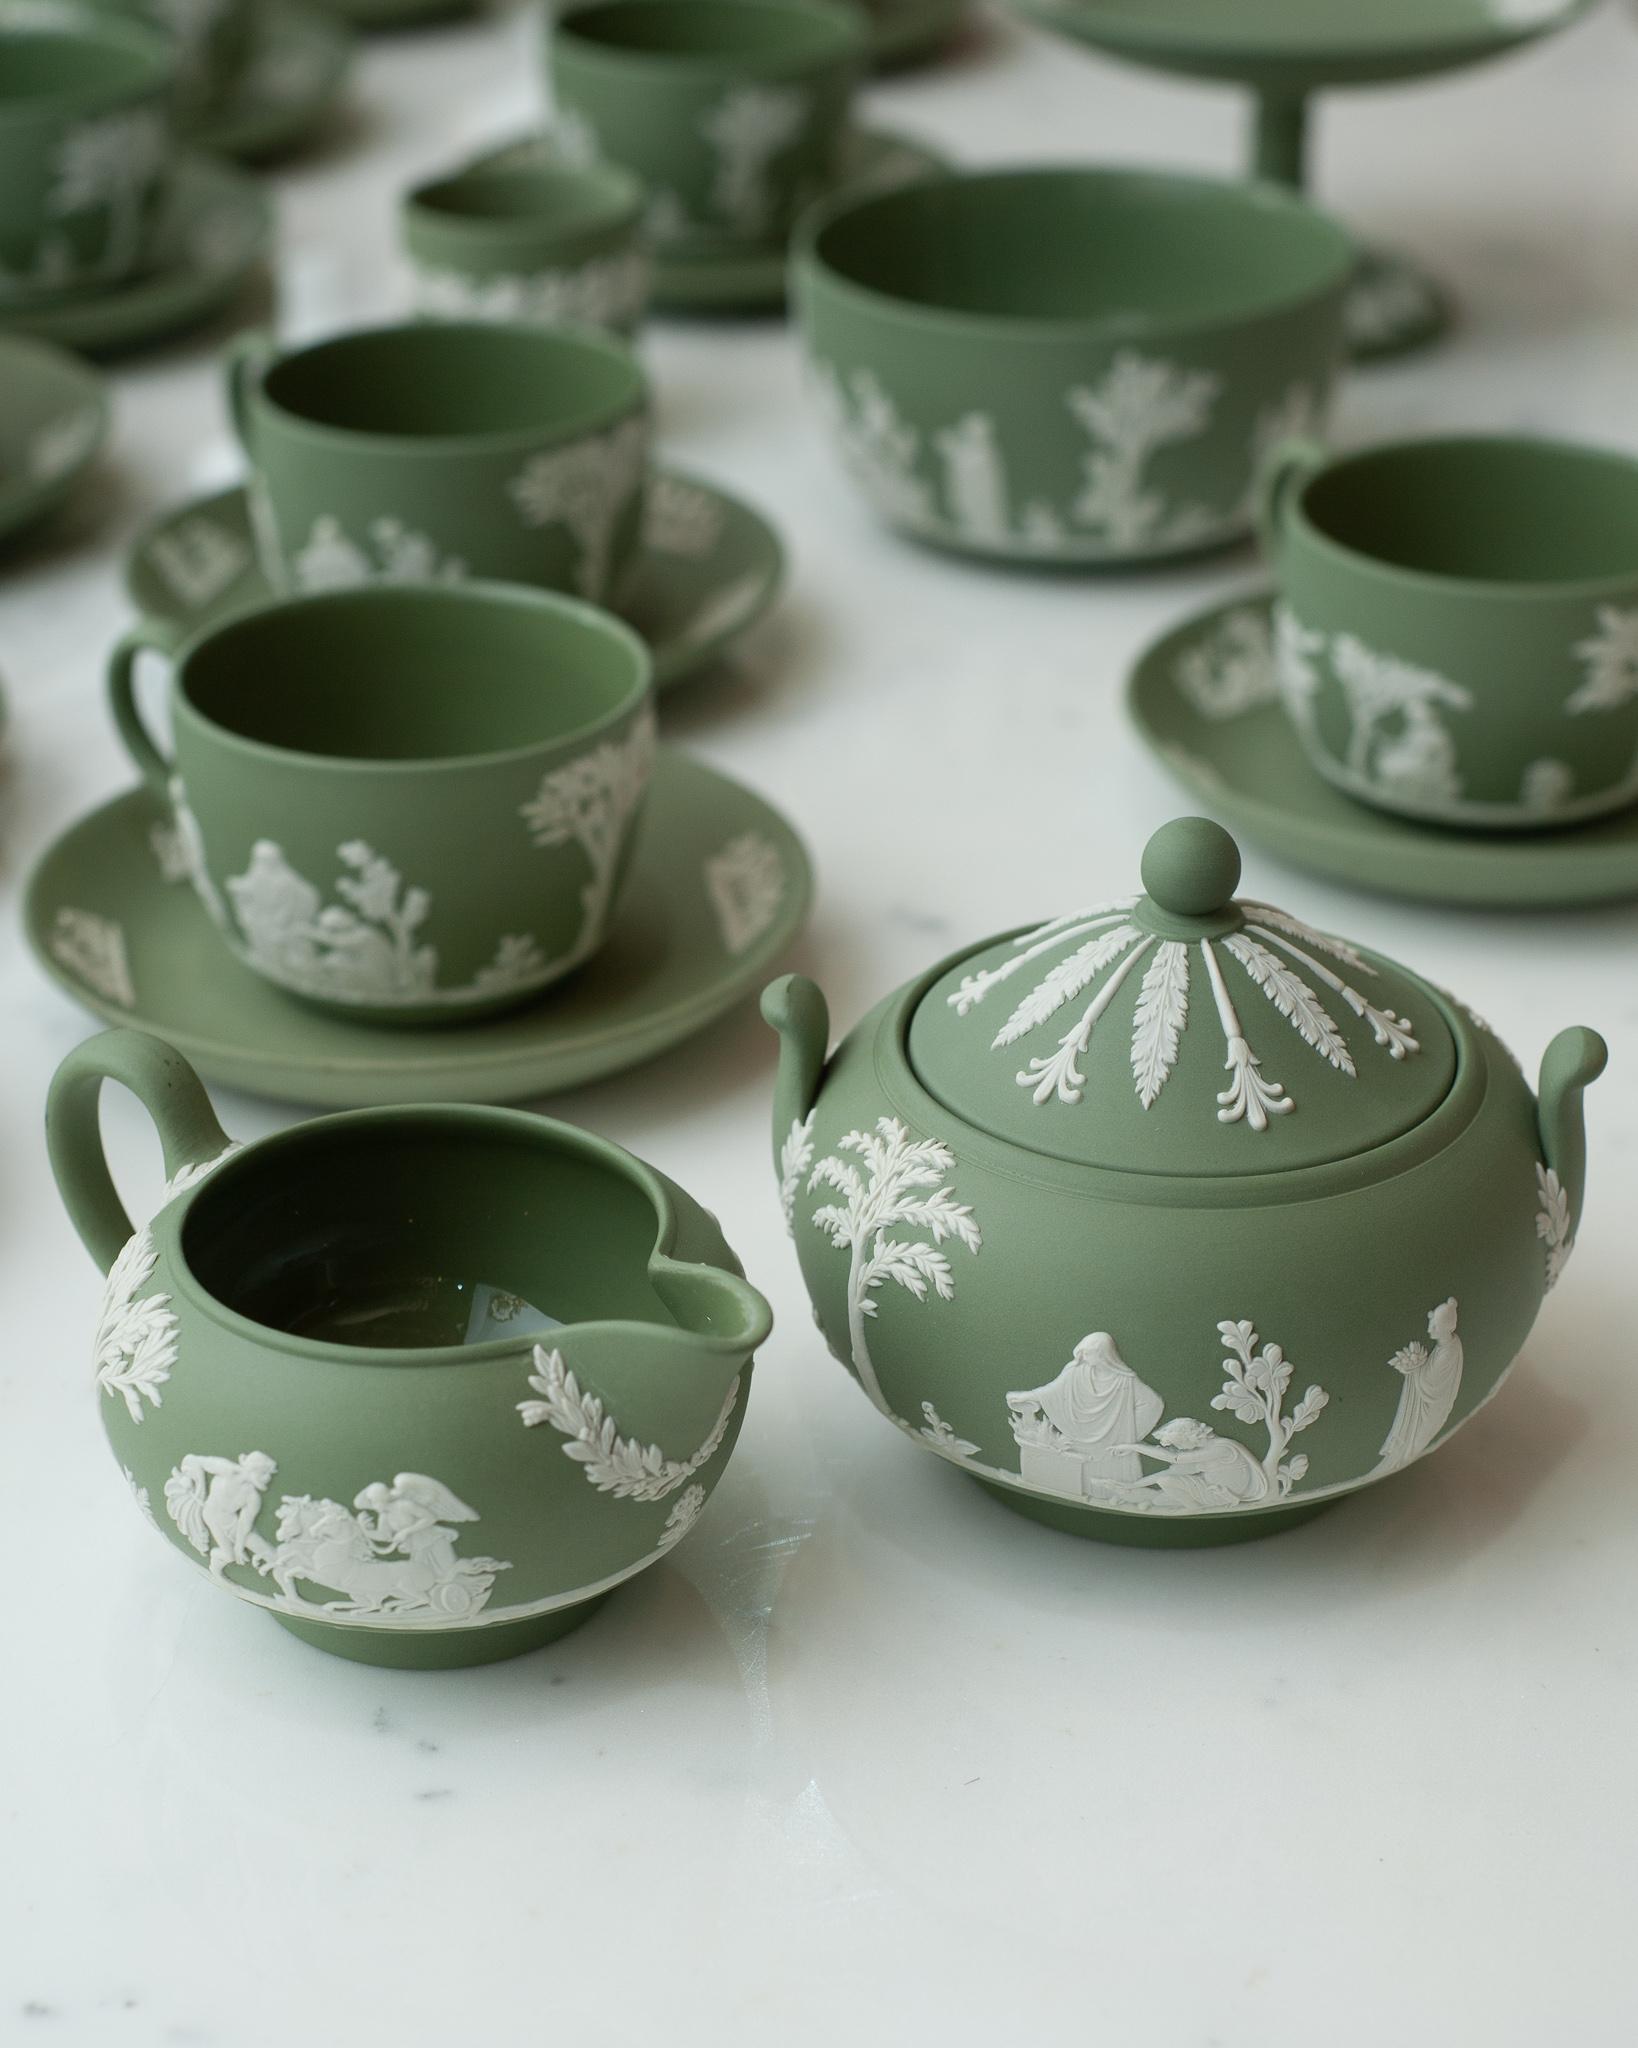 A stunning antique set of Wedgwood sage green jasperware sugar bowl with lid and creamer with white overlay.